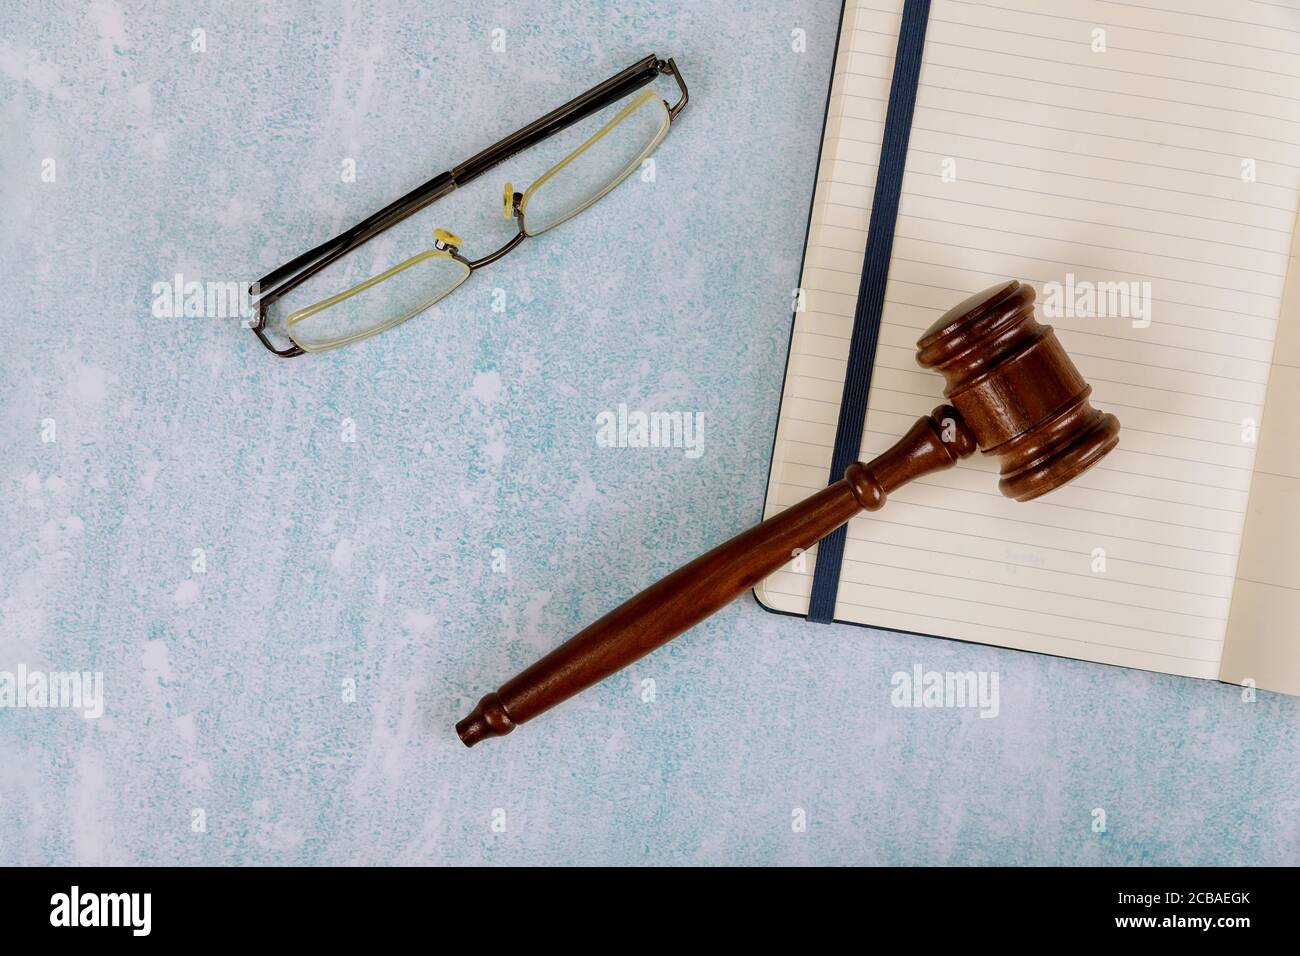 Table office supplies Lawyers Judge desk with wooden judges gavel a notebook of reading glasses Stock Photo